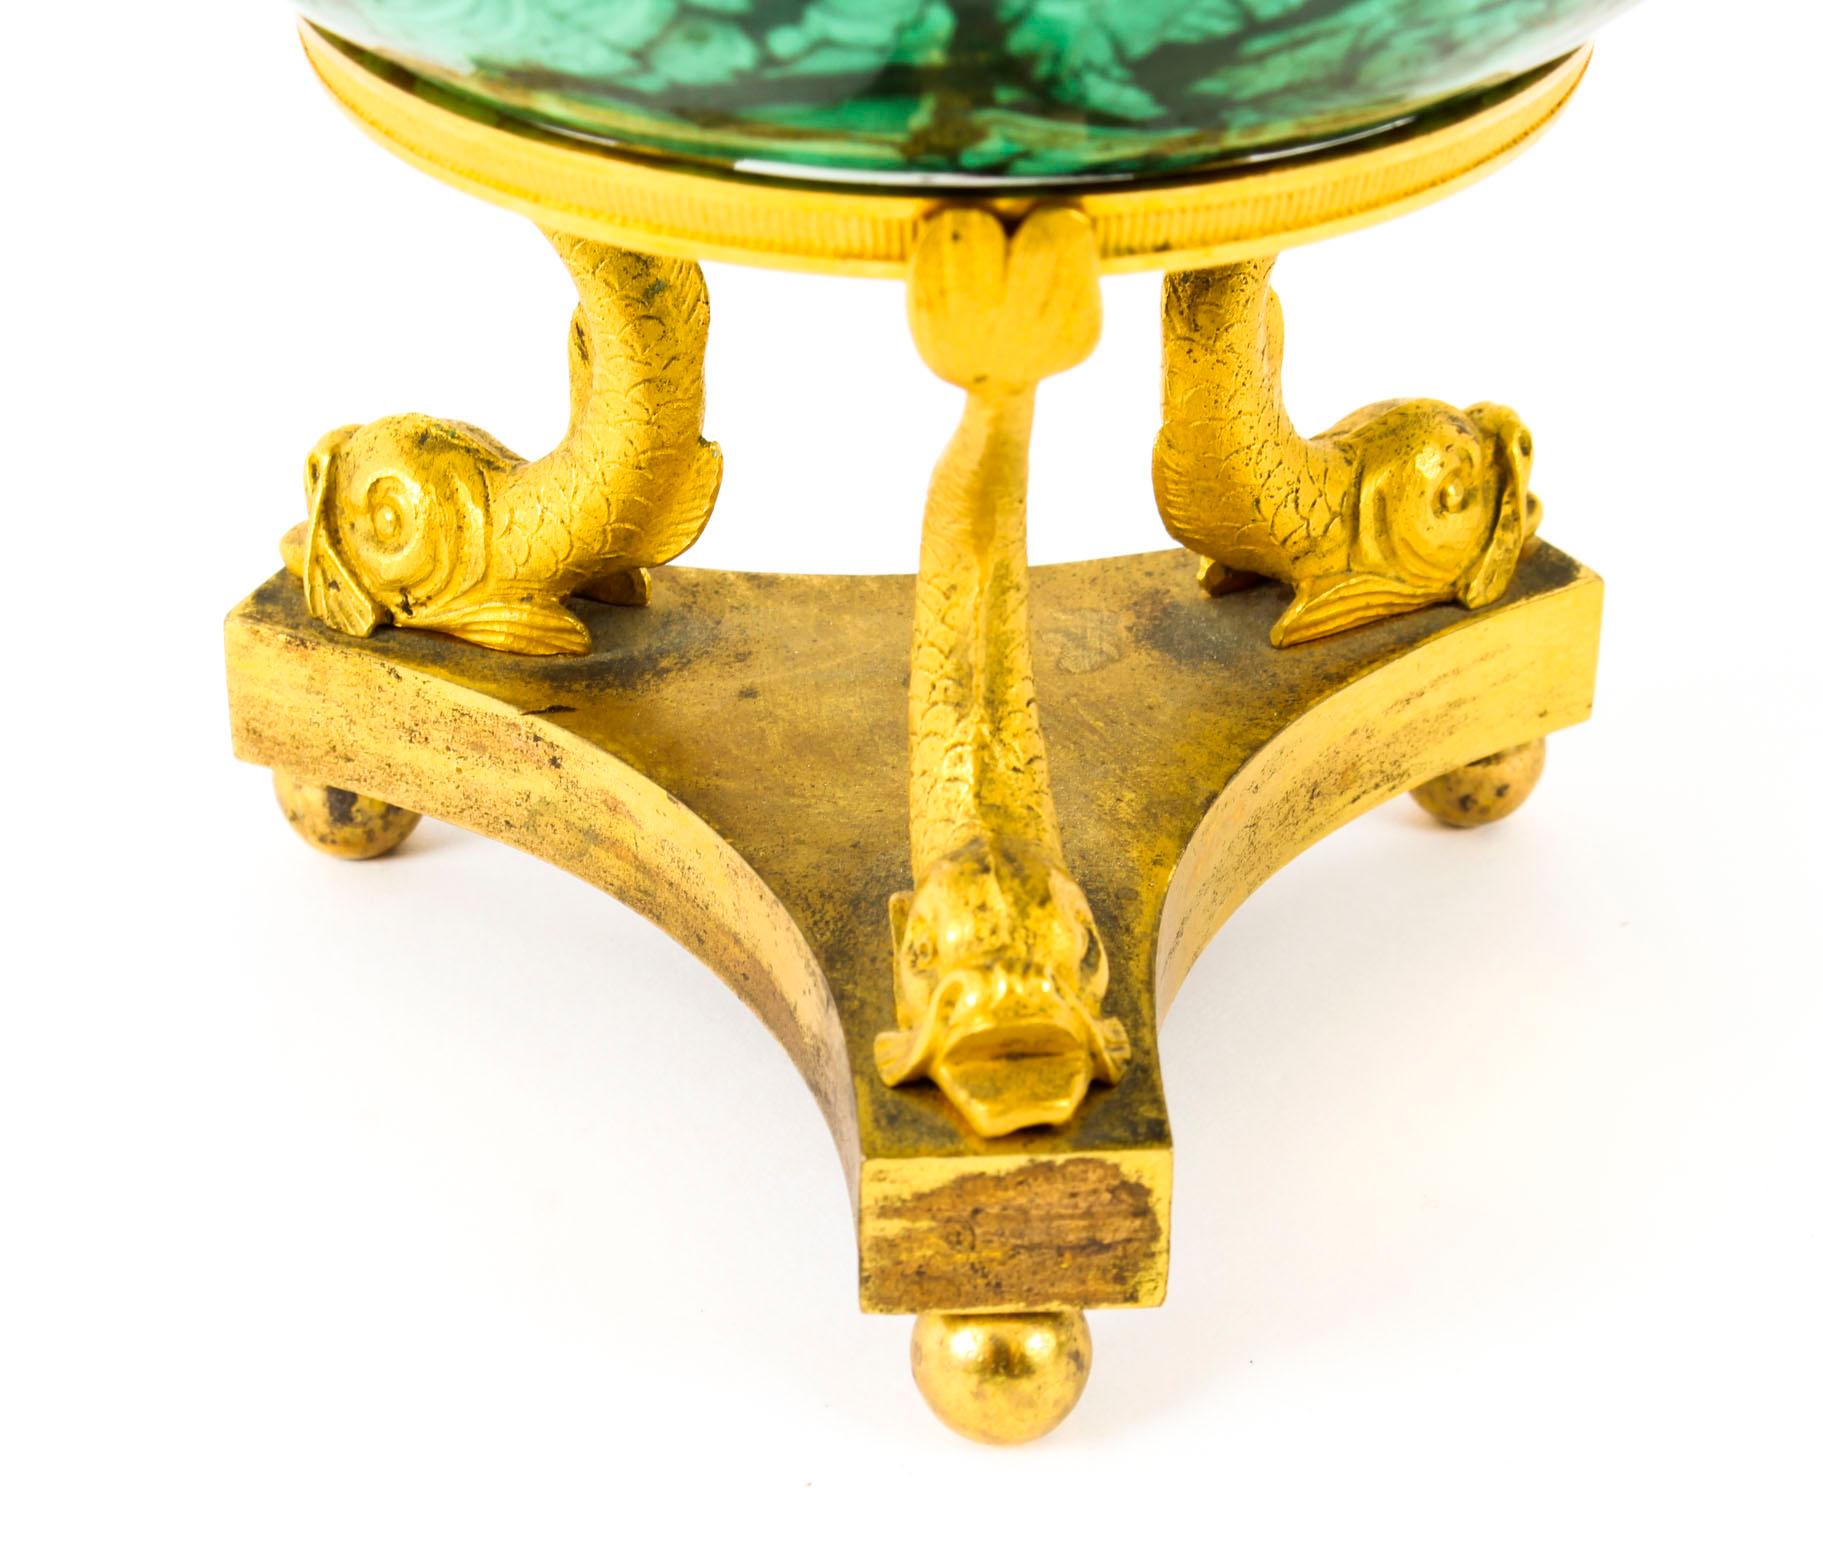 Mid-19th Century Antique Large Polished Malachite and Ormolu Sphere, 19th Century